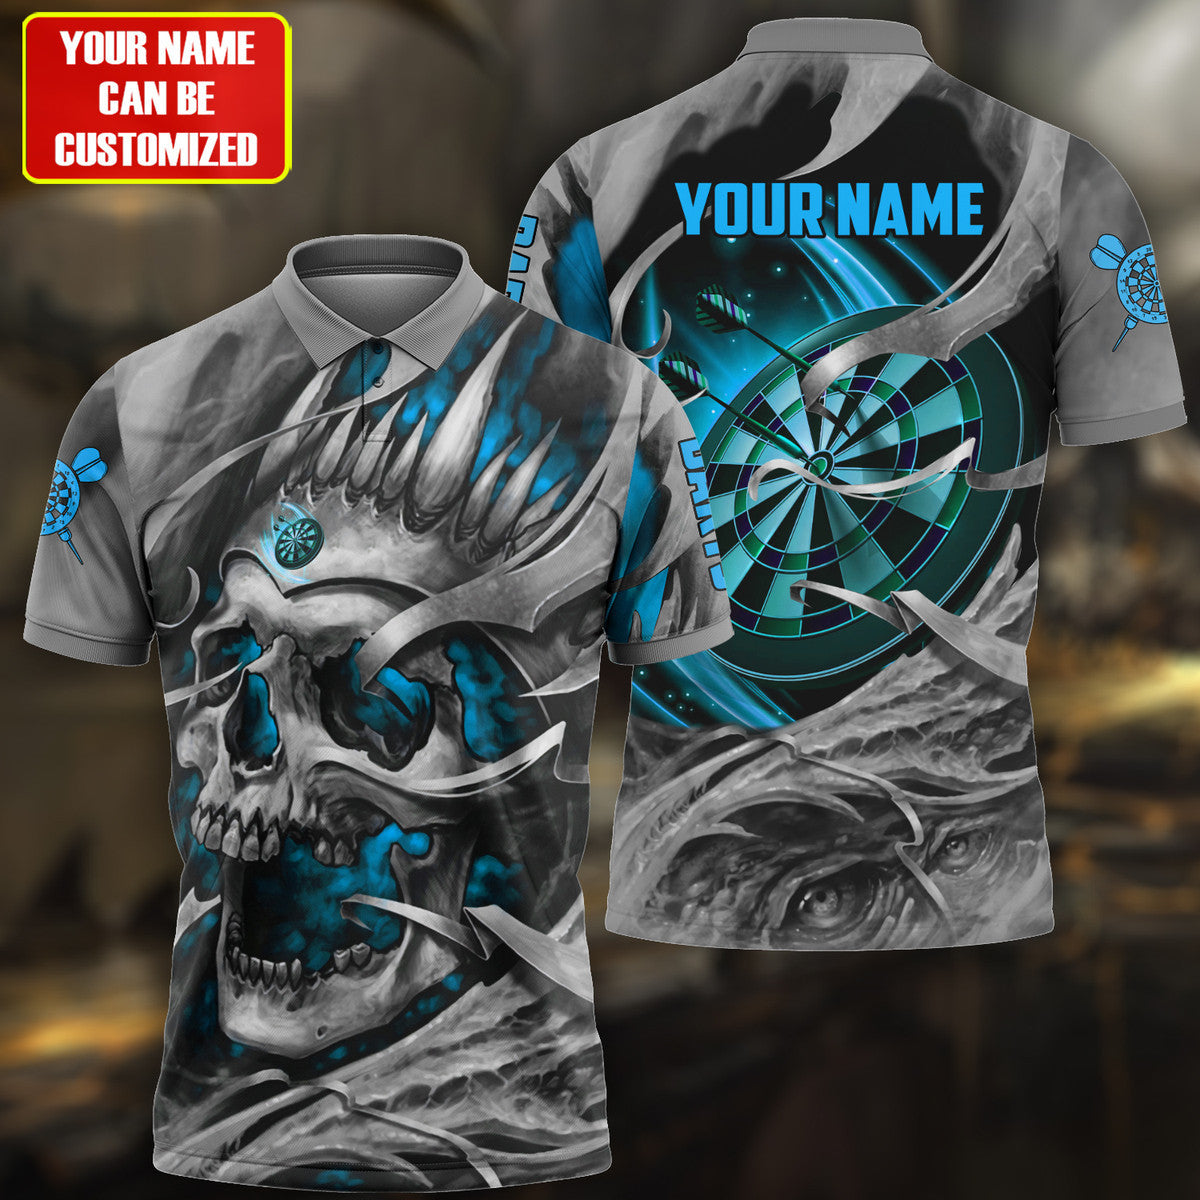 Personalized Name Multicolor Teal Skull Darts All Over Printed Unisex Shirt/ Uniform Shirt Dart Team